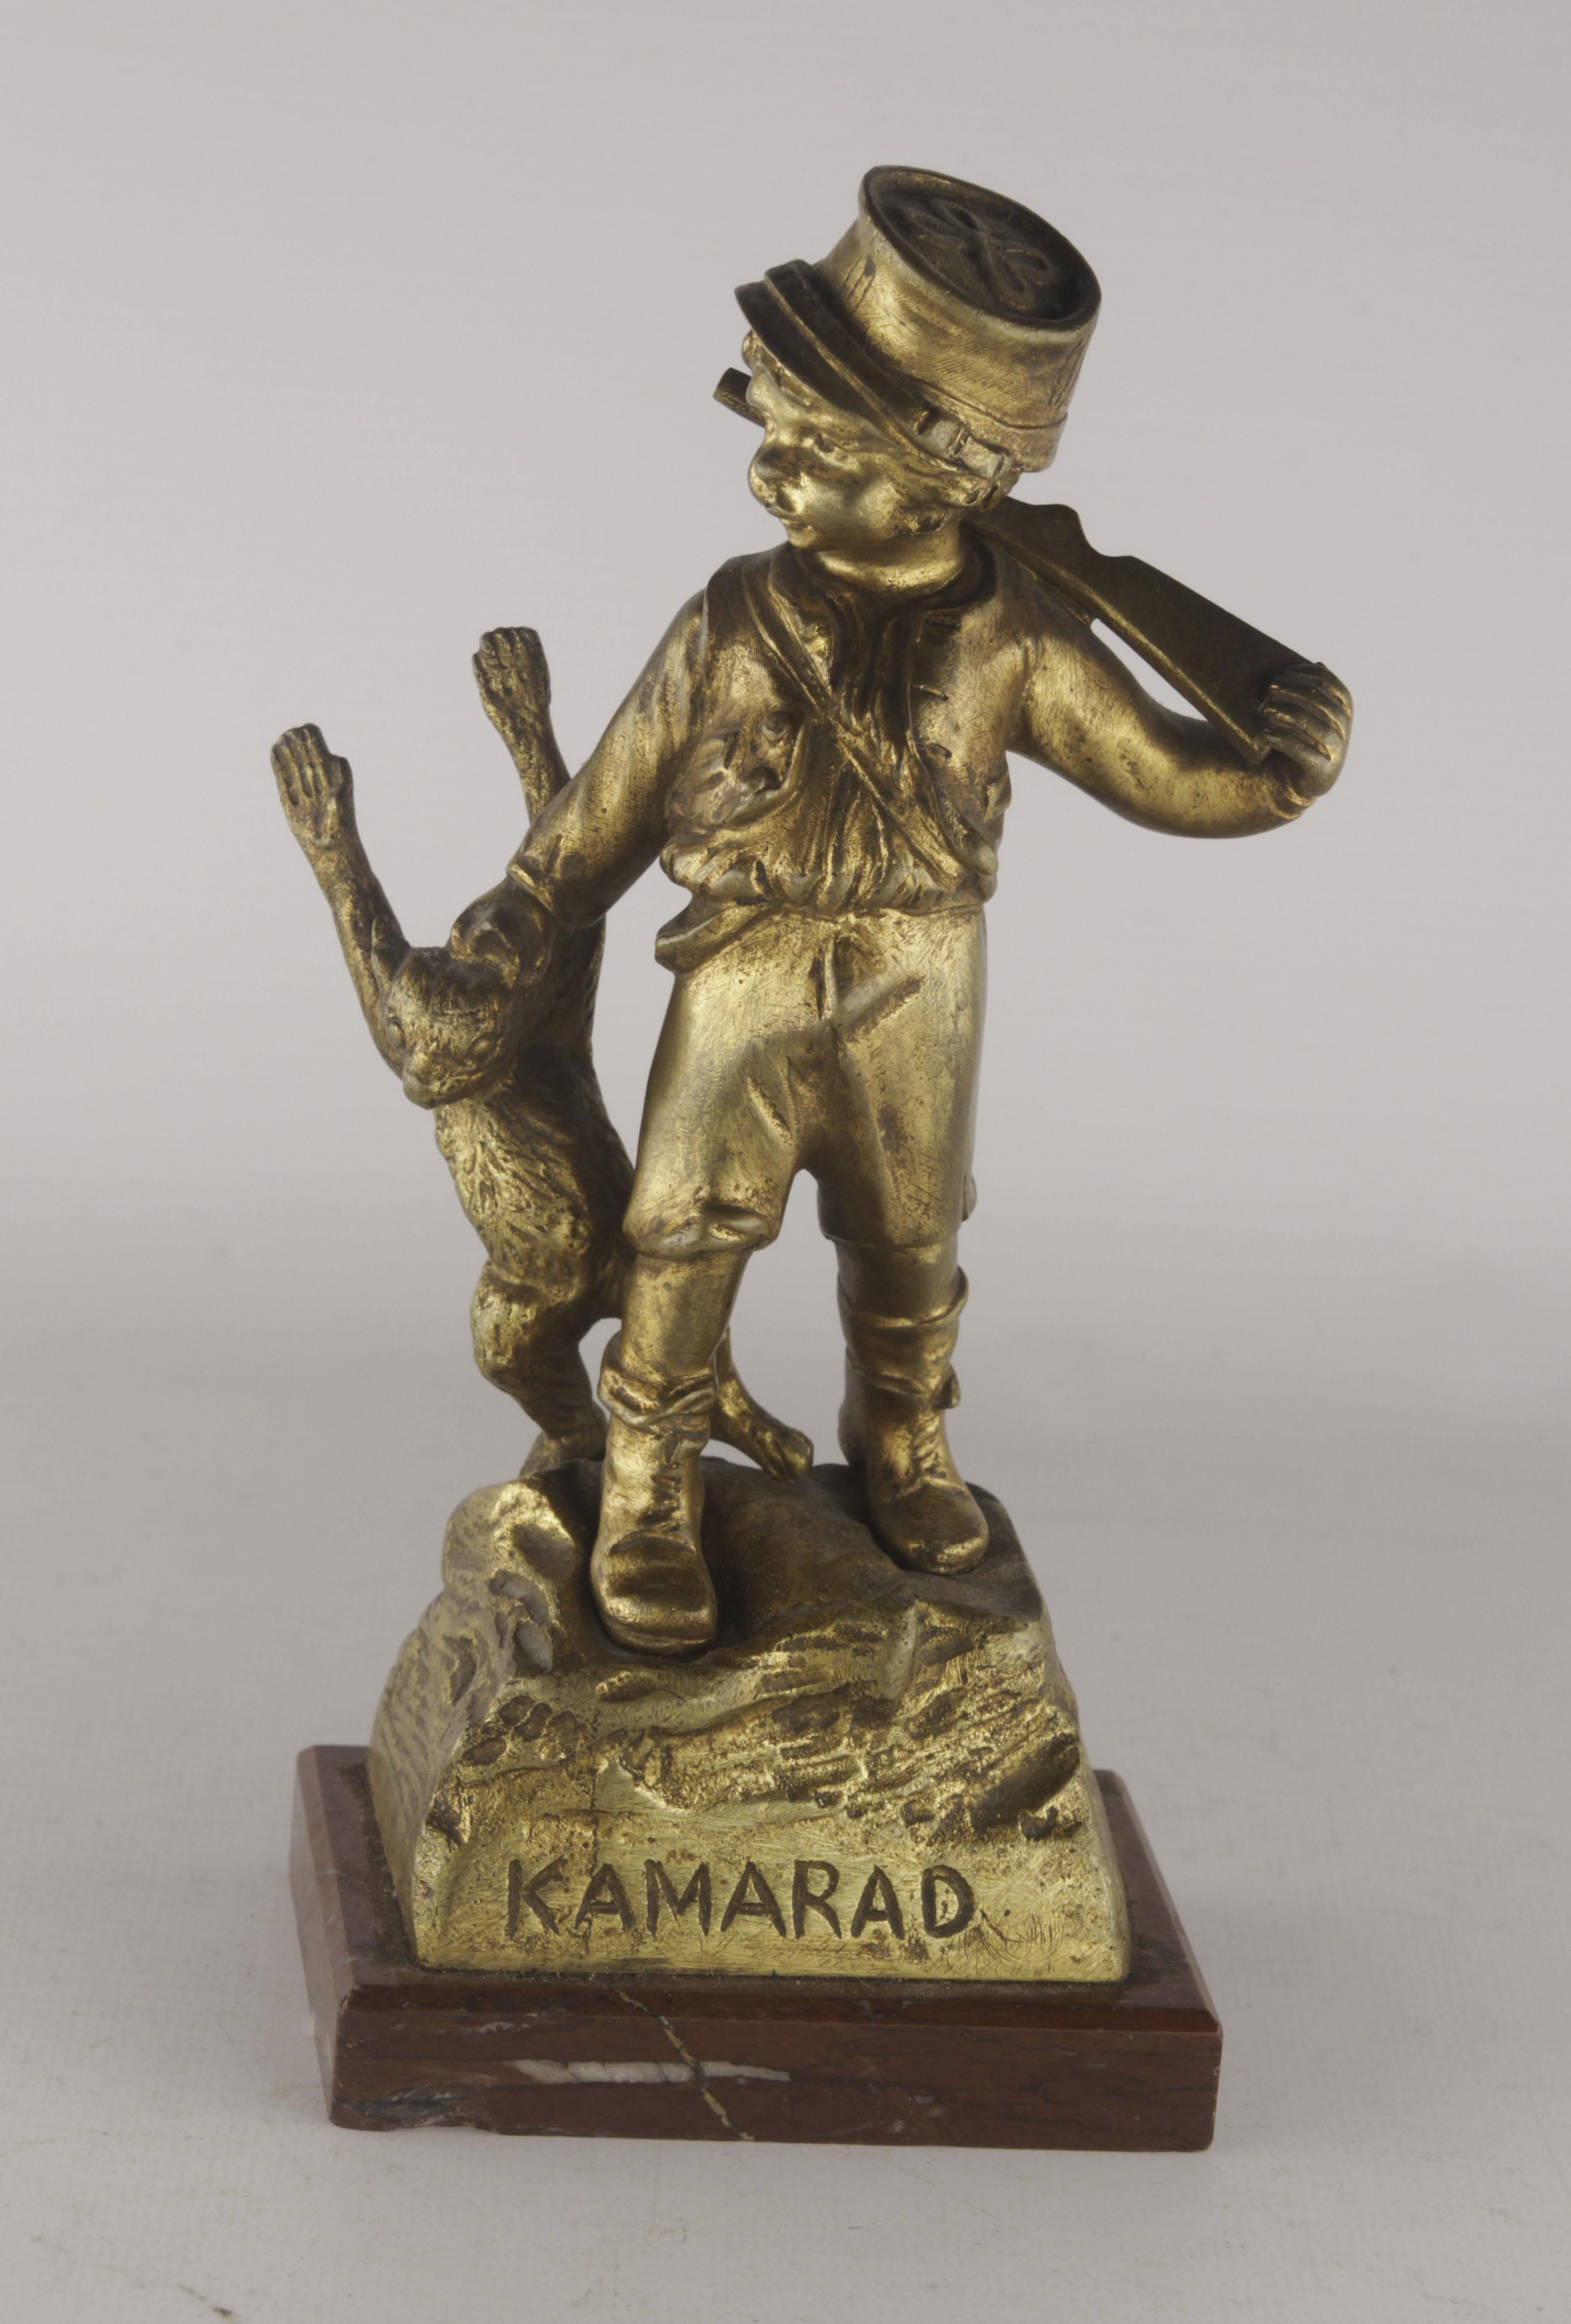 Early 20th century Belle Époque french gilt bronze sculpture of boy playing the hunter Kamarad by Georges Flamand

By: Georges Flamand
Material: bronze, copper, metal
Technique: cast, patinated, gilt, molded, metalwork
Dimensions: 3 in x 4 in x 8